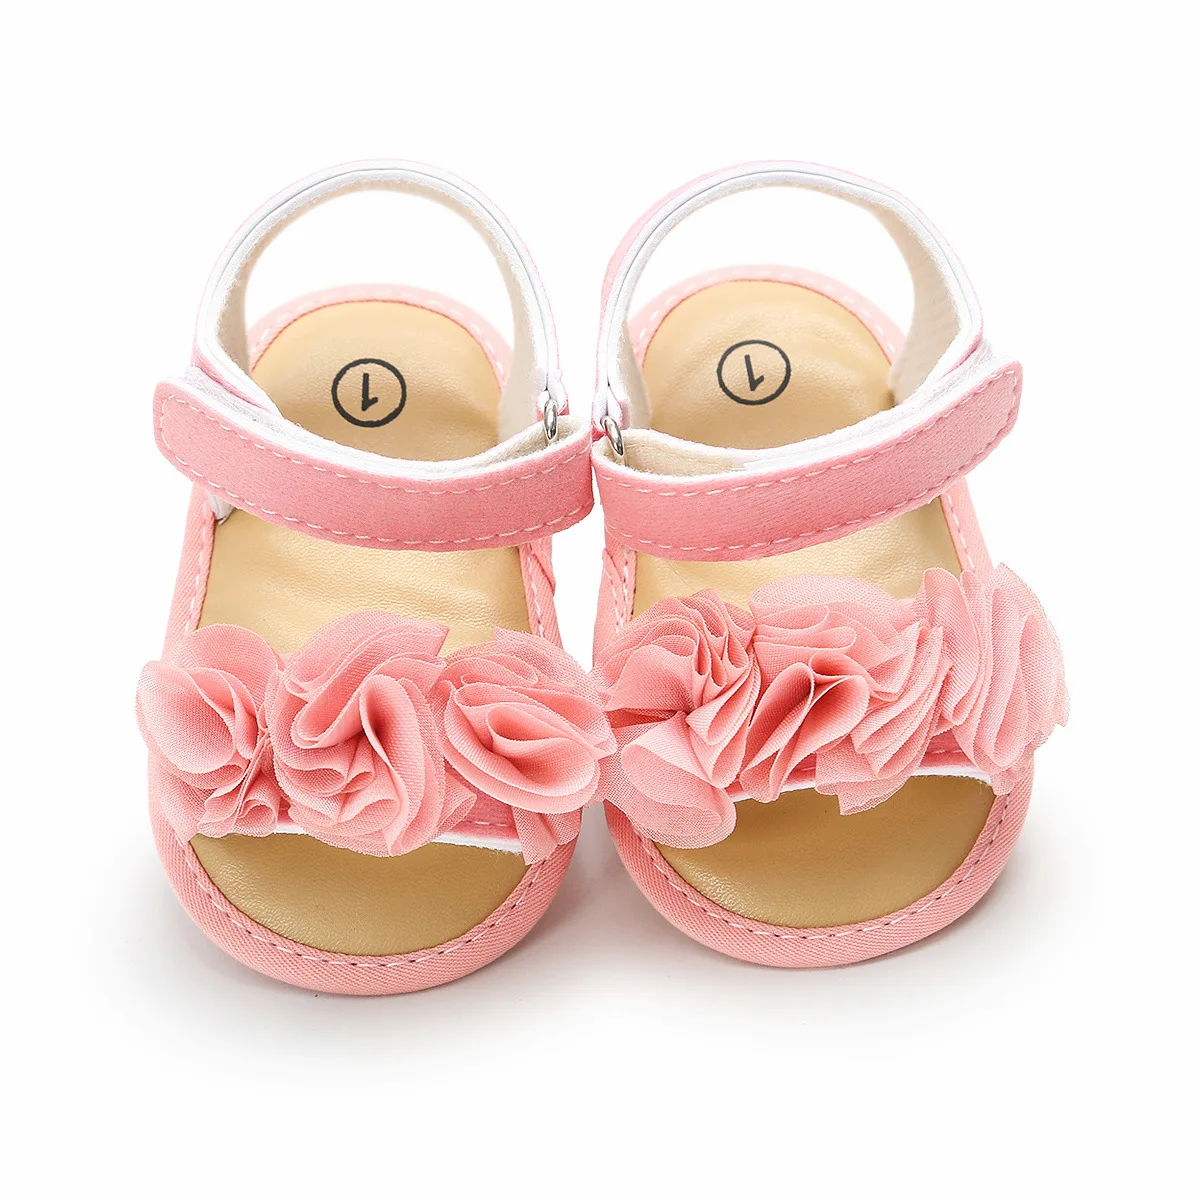 Little Princess Bow Multi Colorful Bling Bling Girl Sandals House Footwear Summer Comfortable Flat Baby Shoes